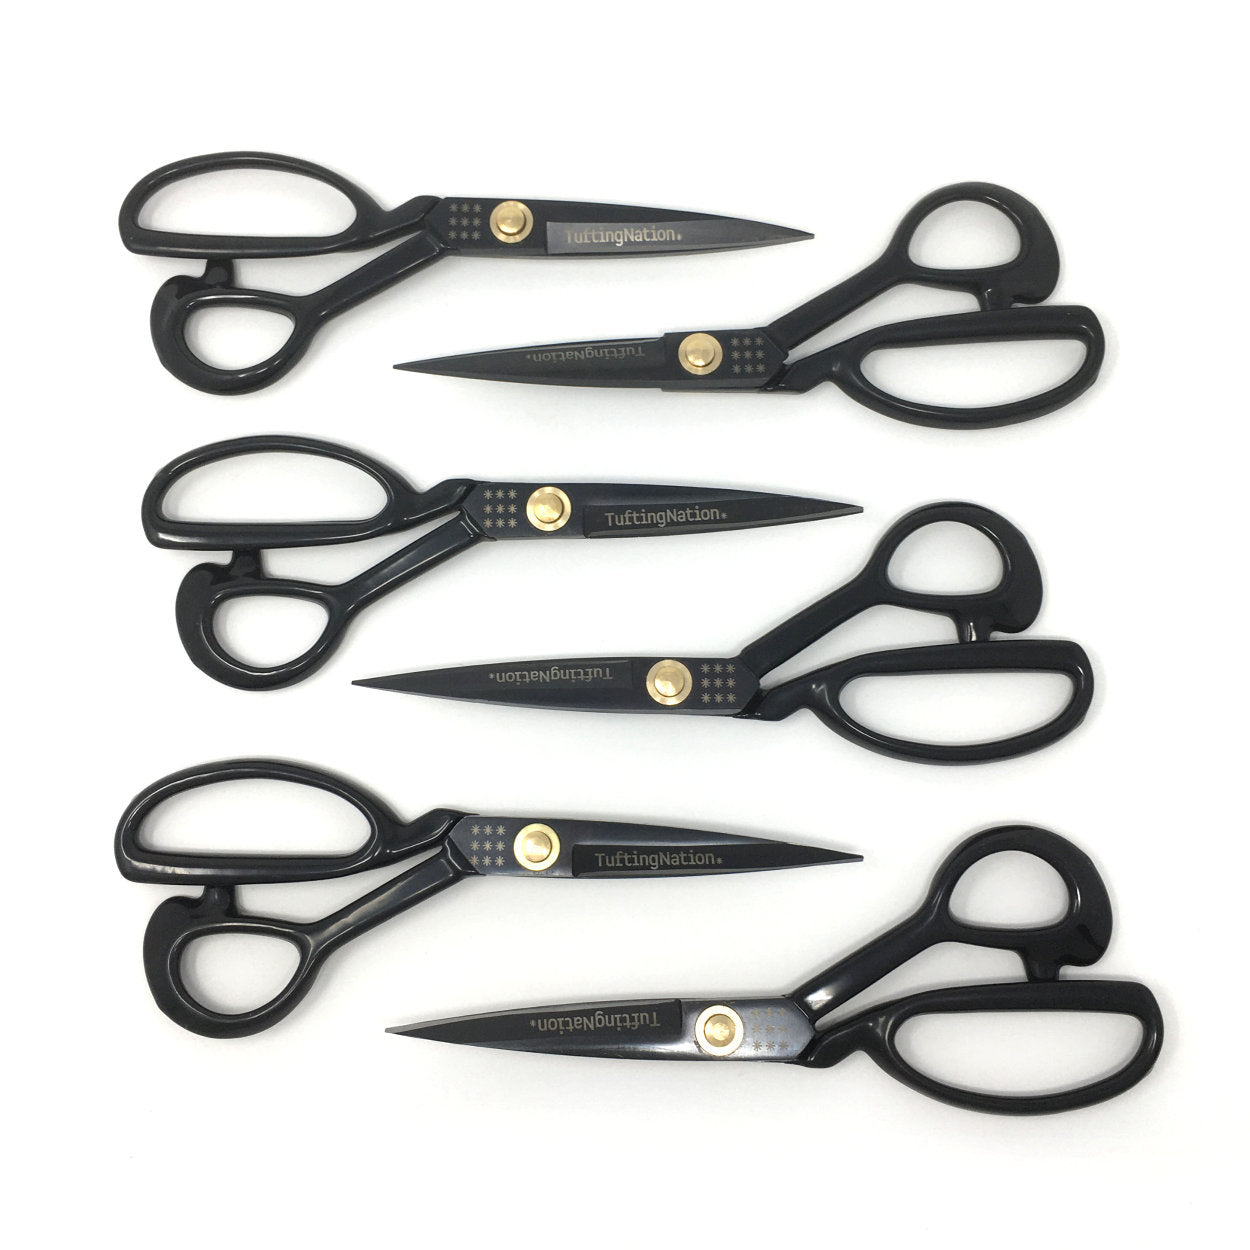 Black Tailor Shears for Tufting, Sewing, Crafting | TuftingNation Canada